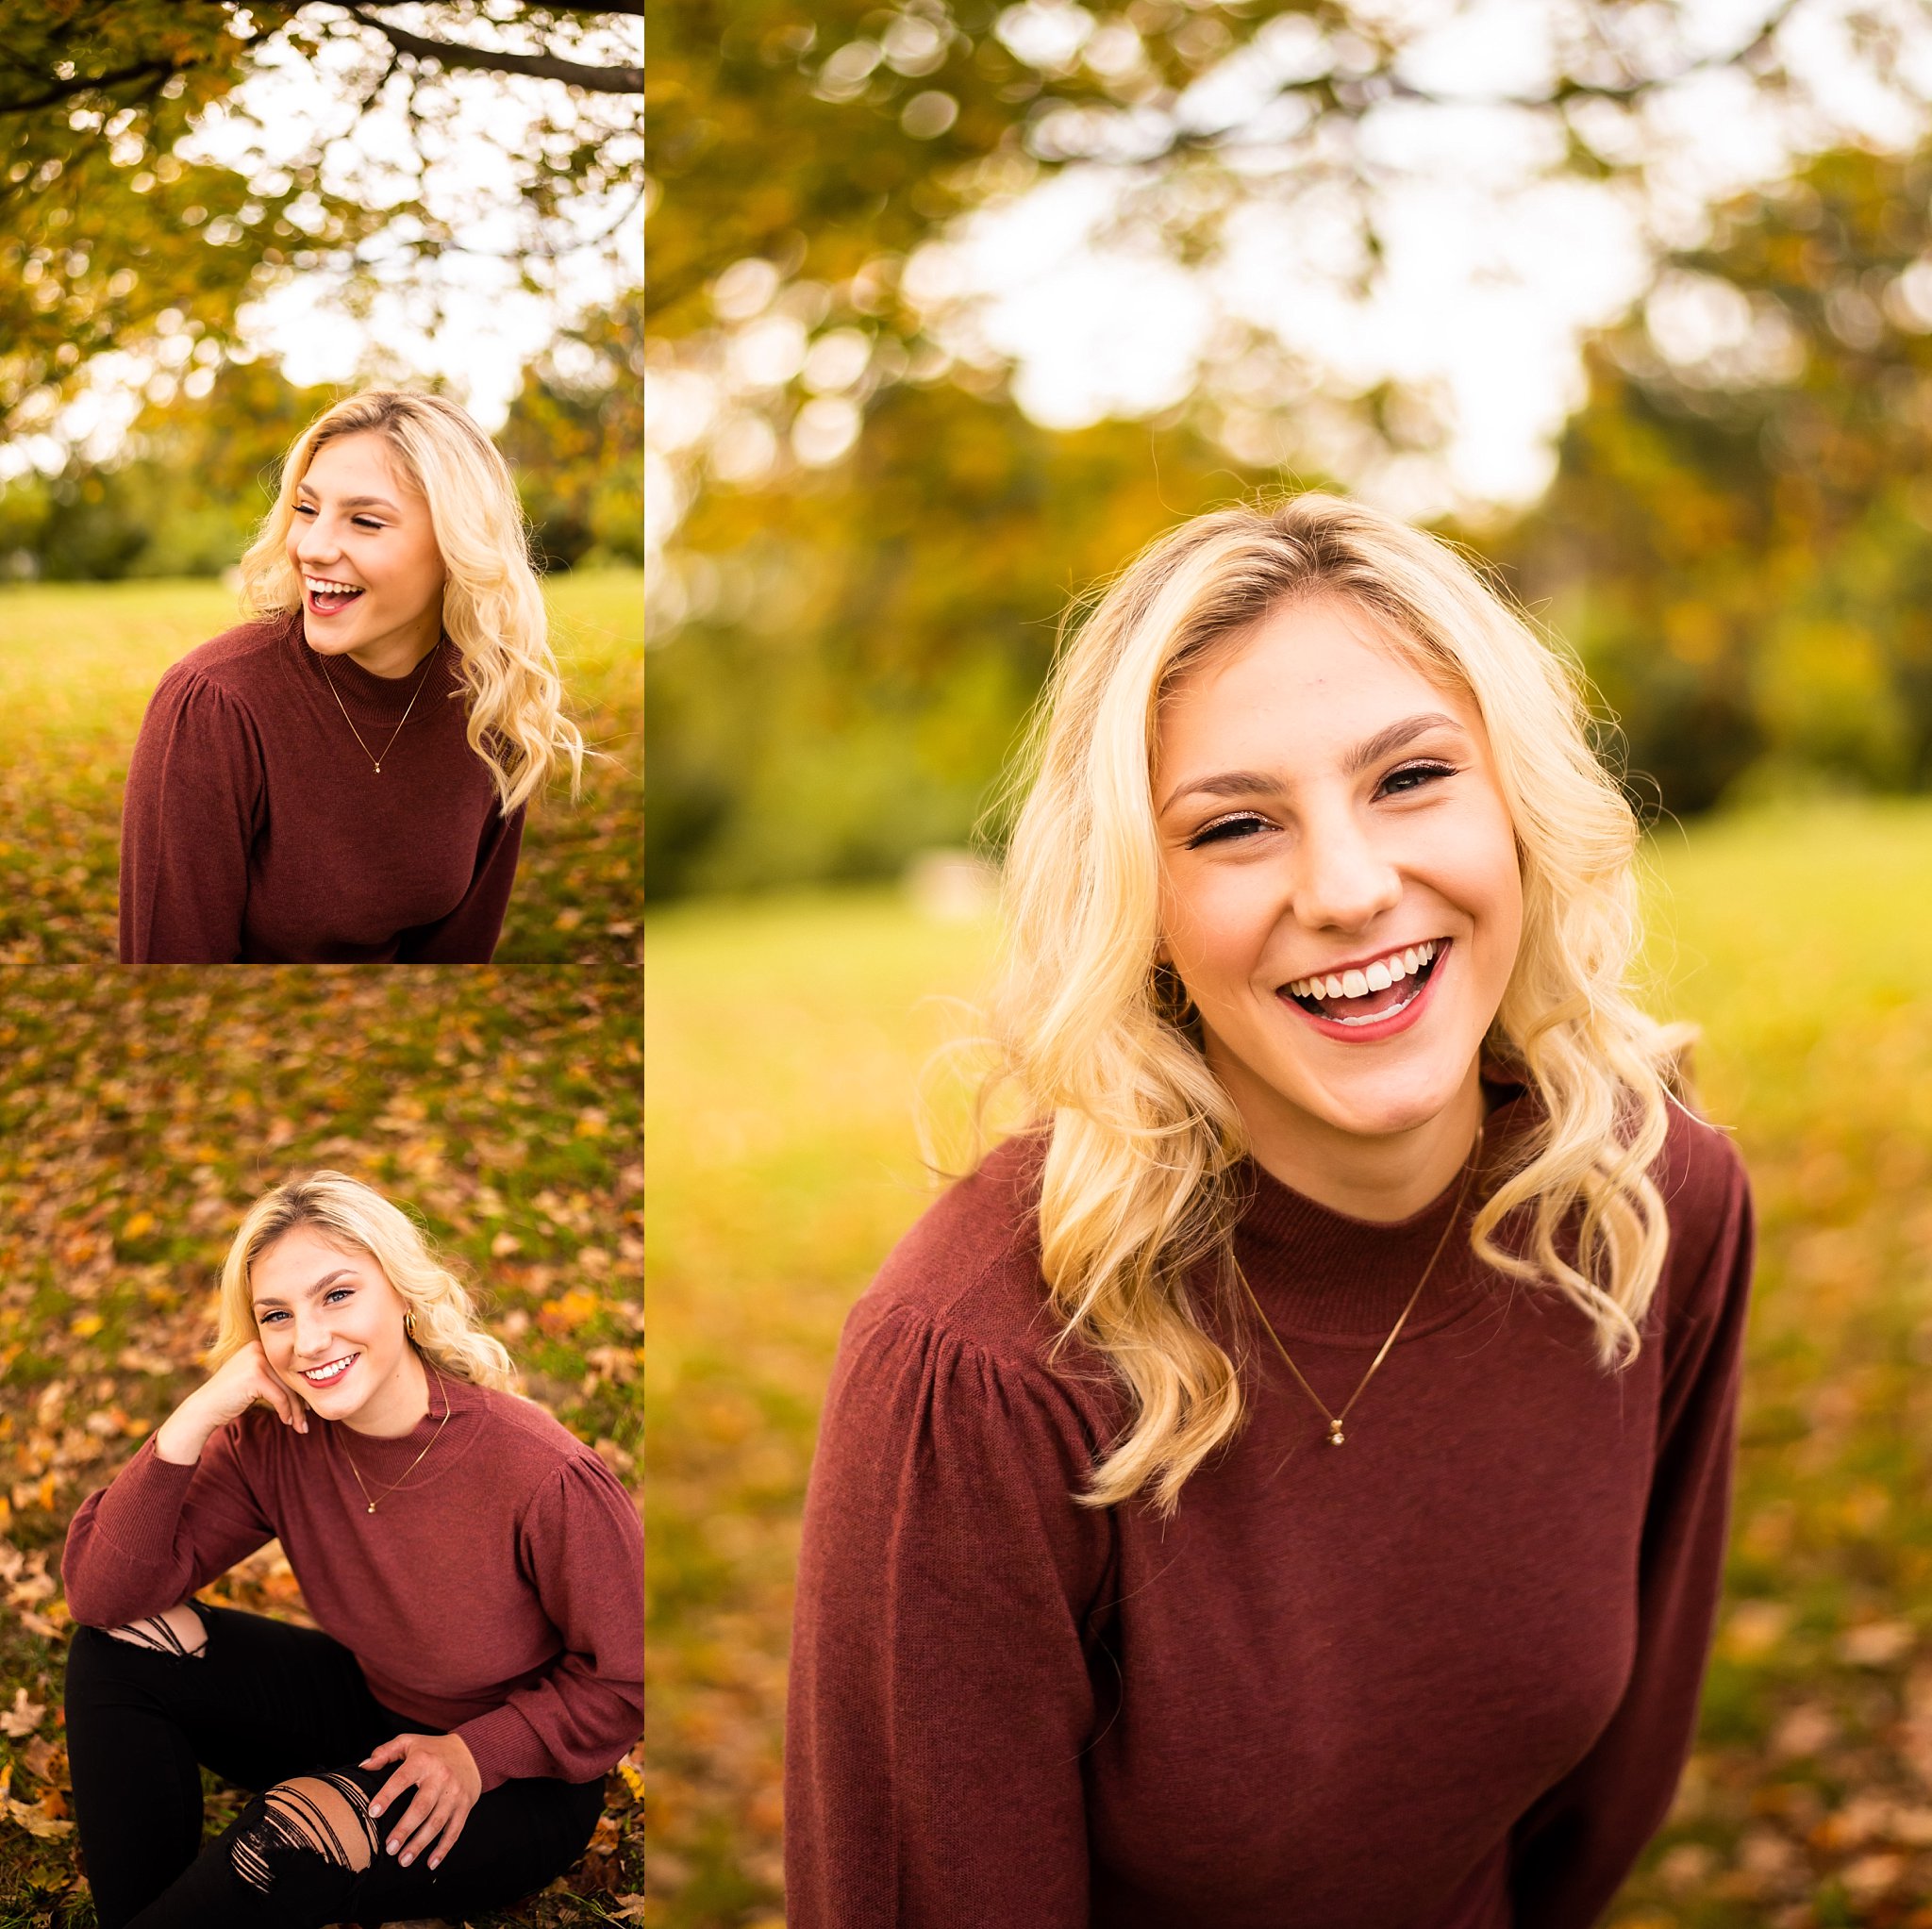 senior photo taken by rural southern photography in knoxville, tennessee. blonde girl in red sweater and black ripped jeans in field with fall leaves